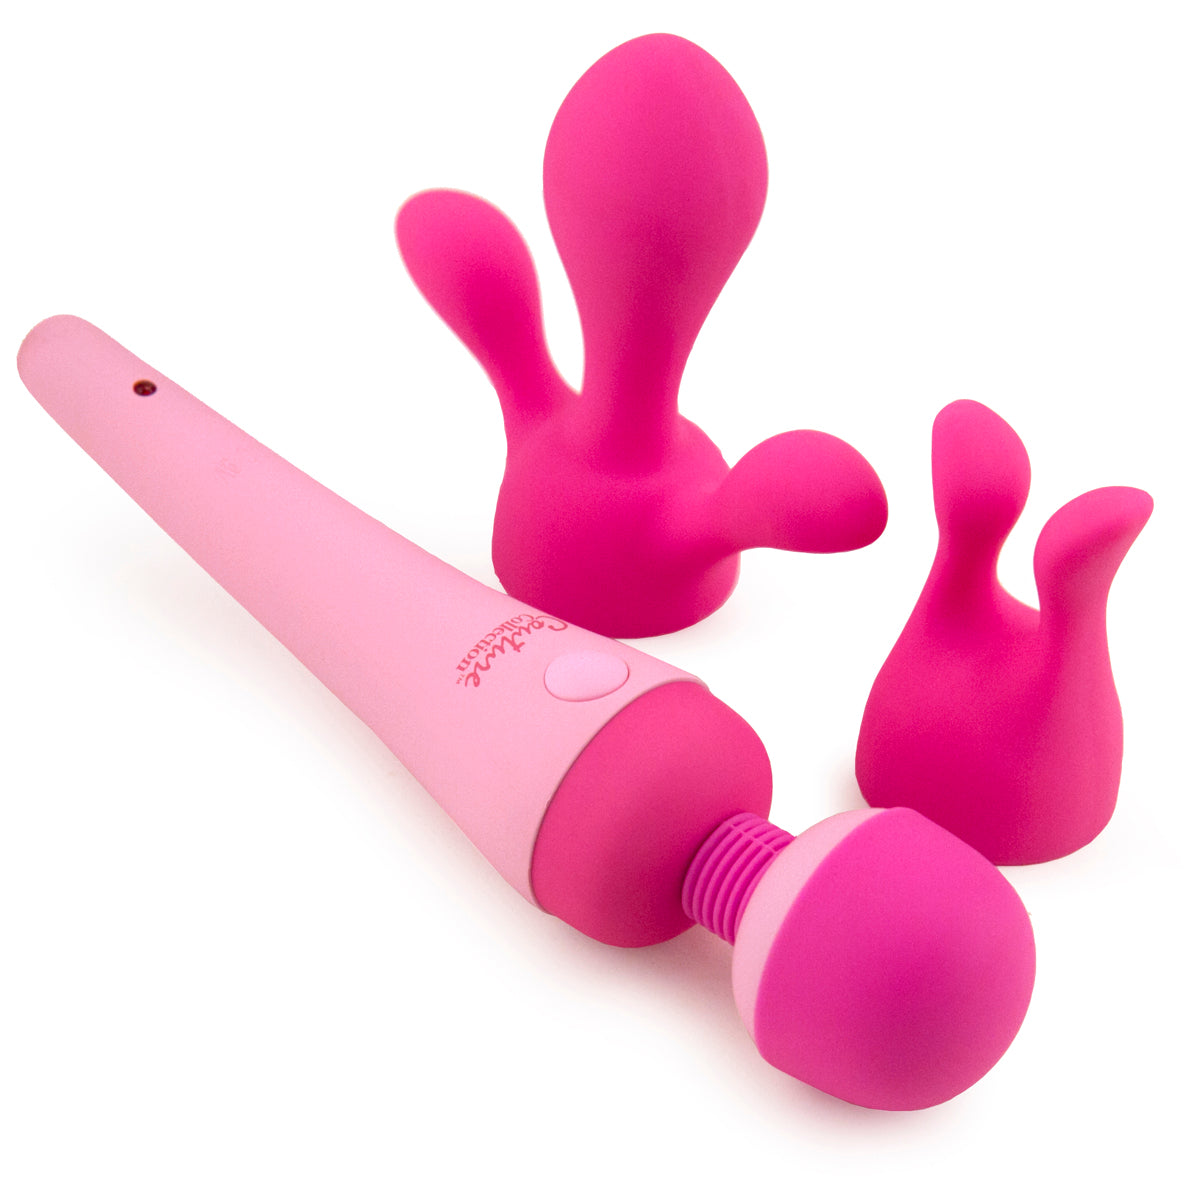 Image of ID 496687301 The Pink Inspire Vibrator - Unrelenting Vibrations